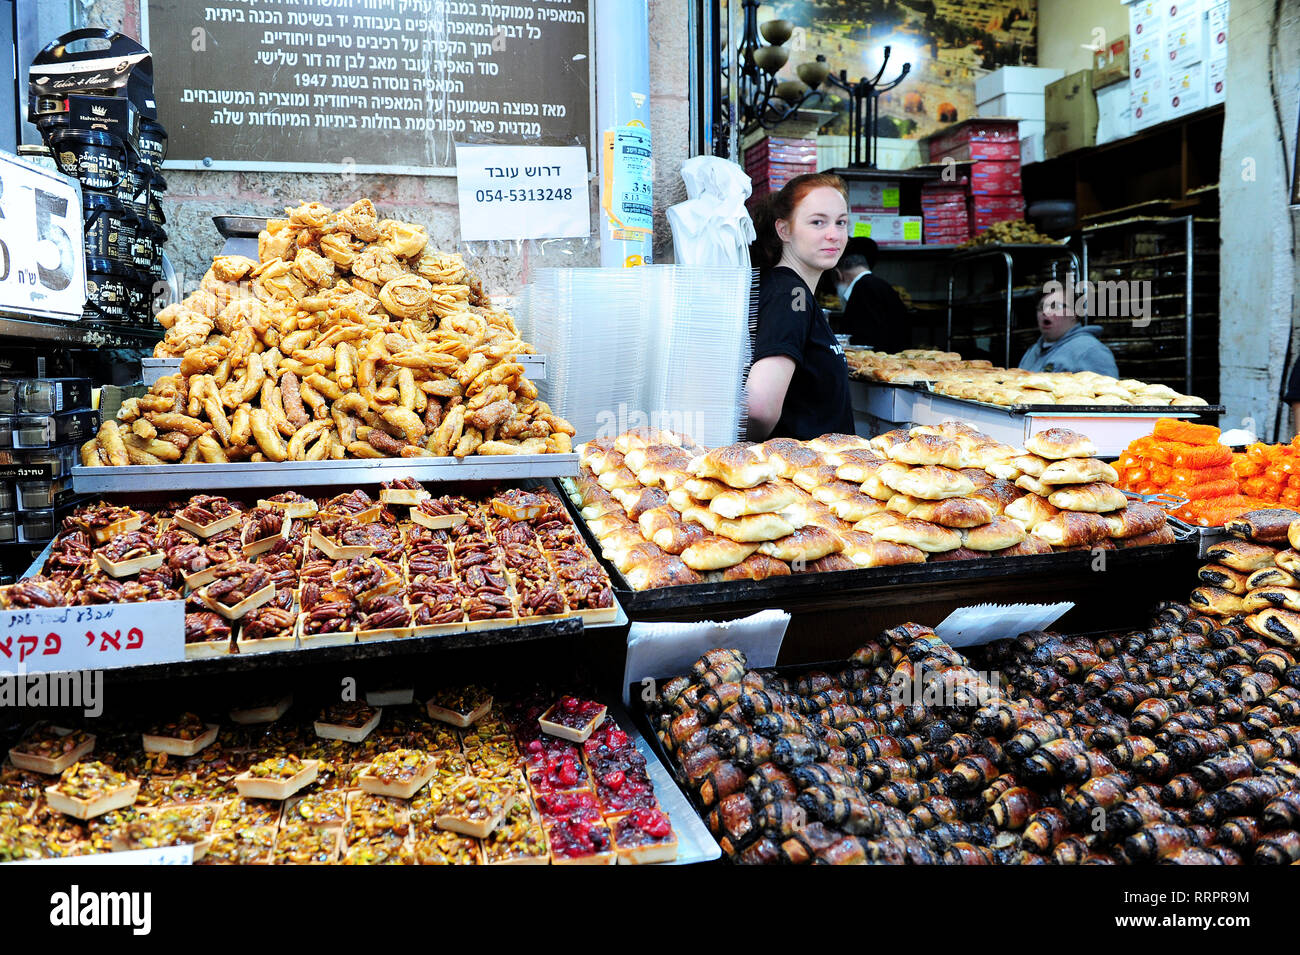 A young female vendor portrayed behind her stall selling traditional Kosher treats at Yehuda Market, Jerusalem, Israel Stock Photo